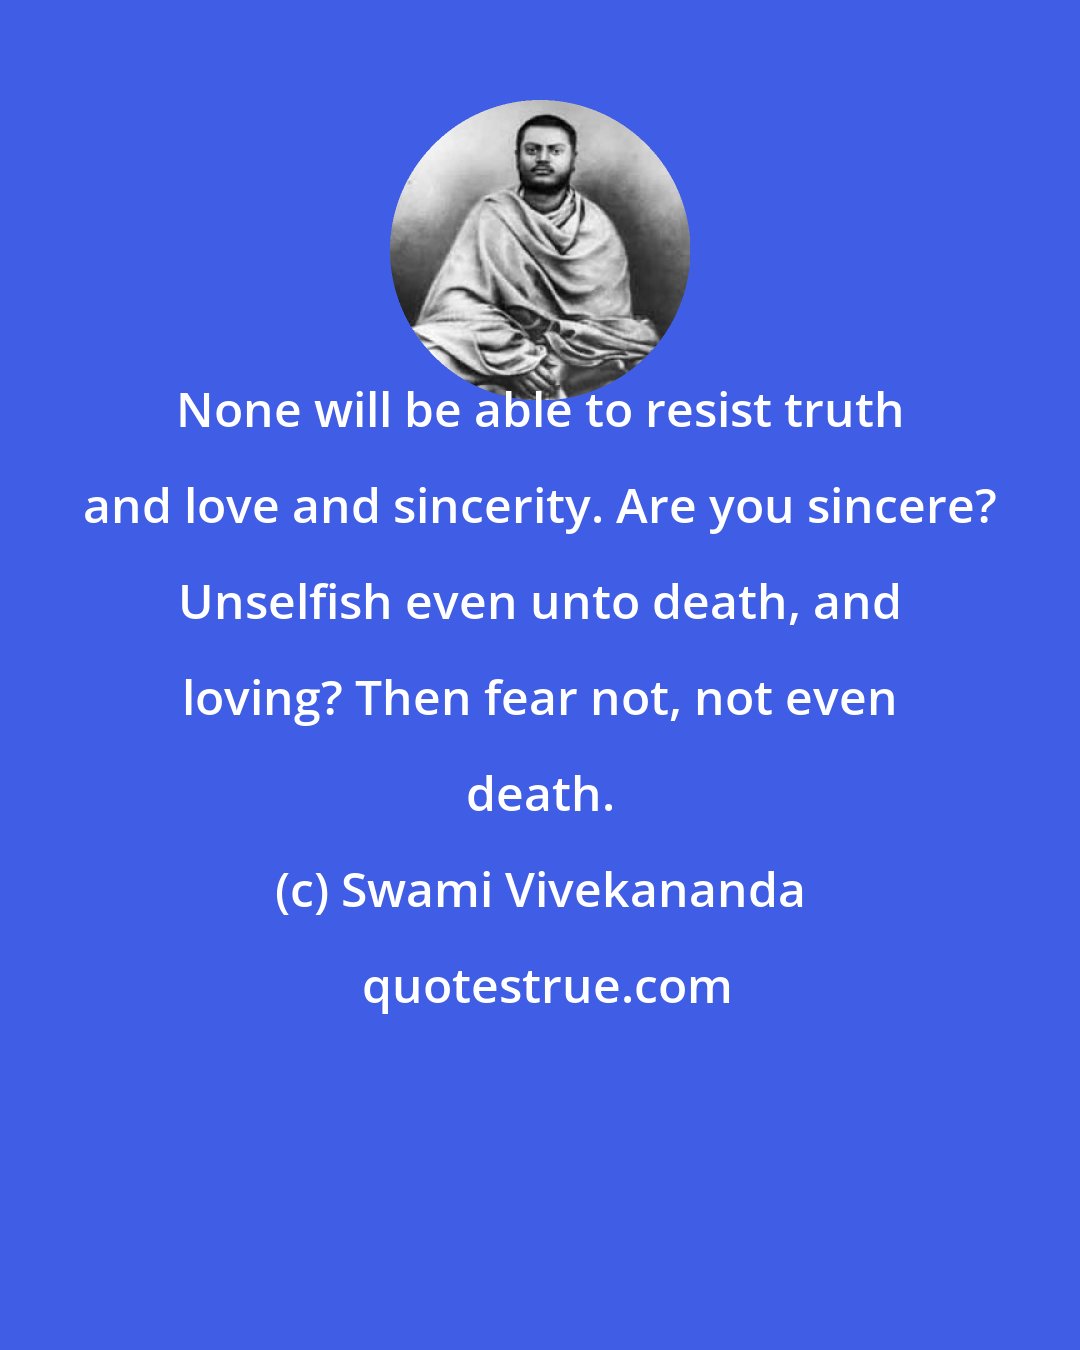 Swami Vivekananda: None will be able to resist truth and love and sincerity. Are you sincere? Unselfish even unto death, and loving? Then fear not, not even death.